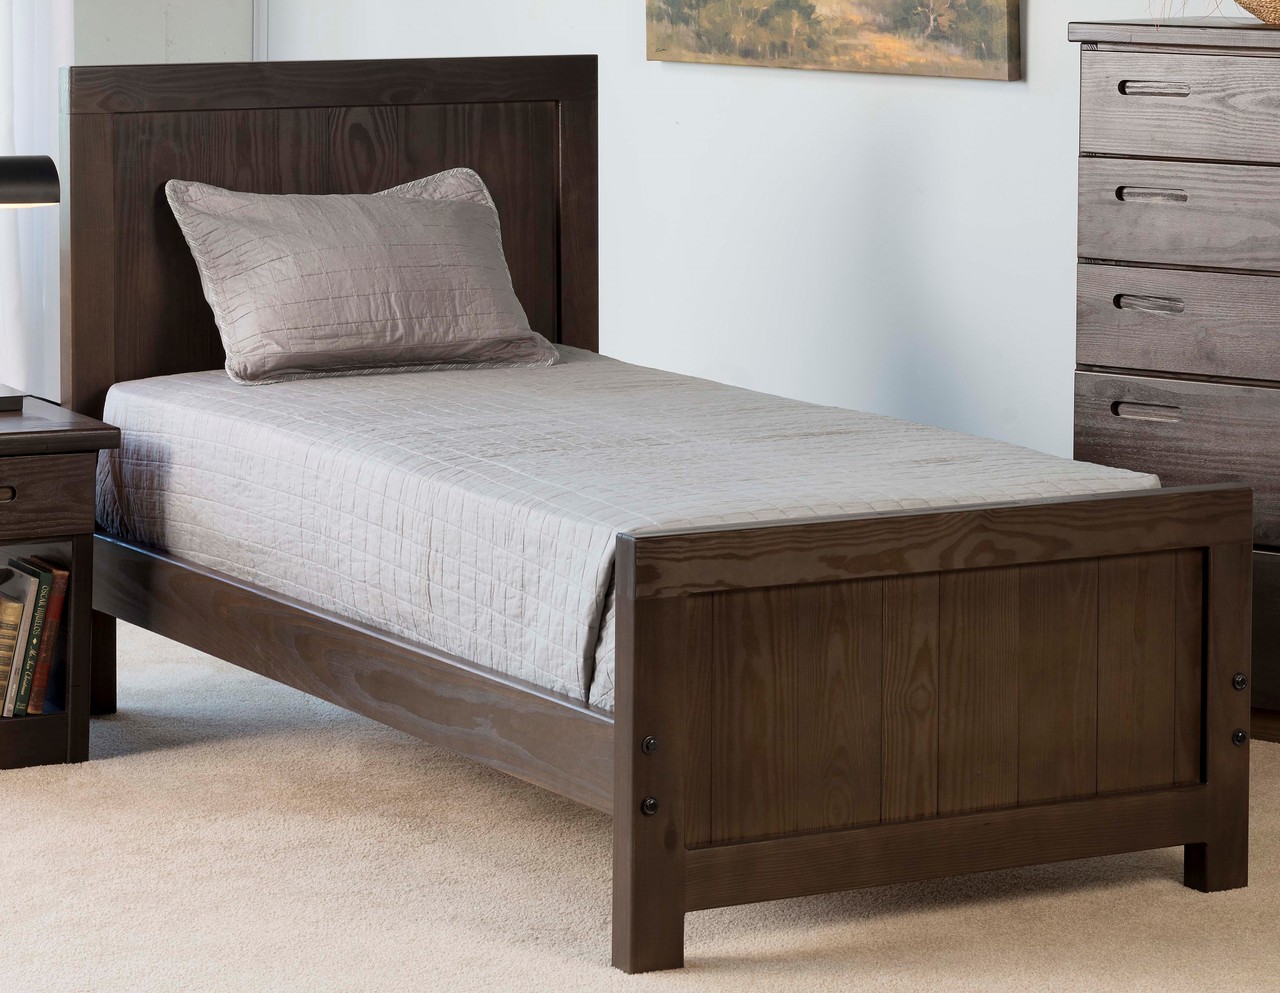 twin bed with headboard and mattress